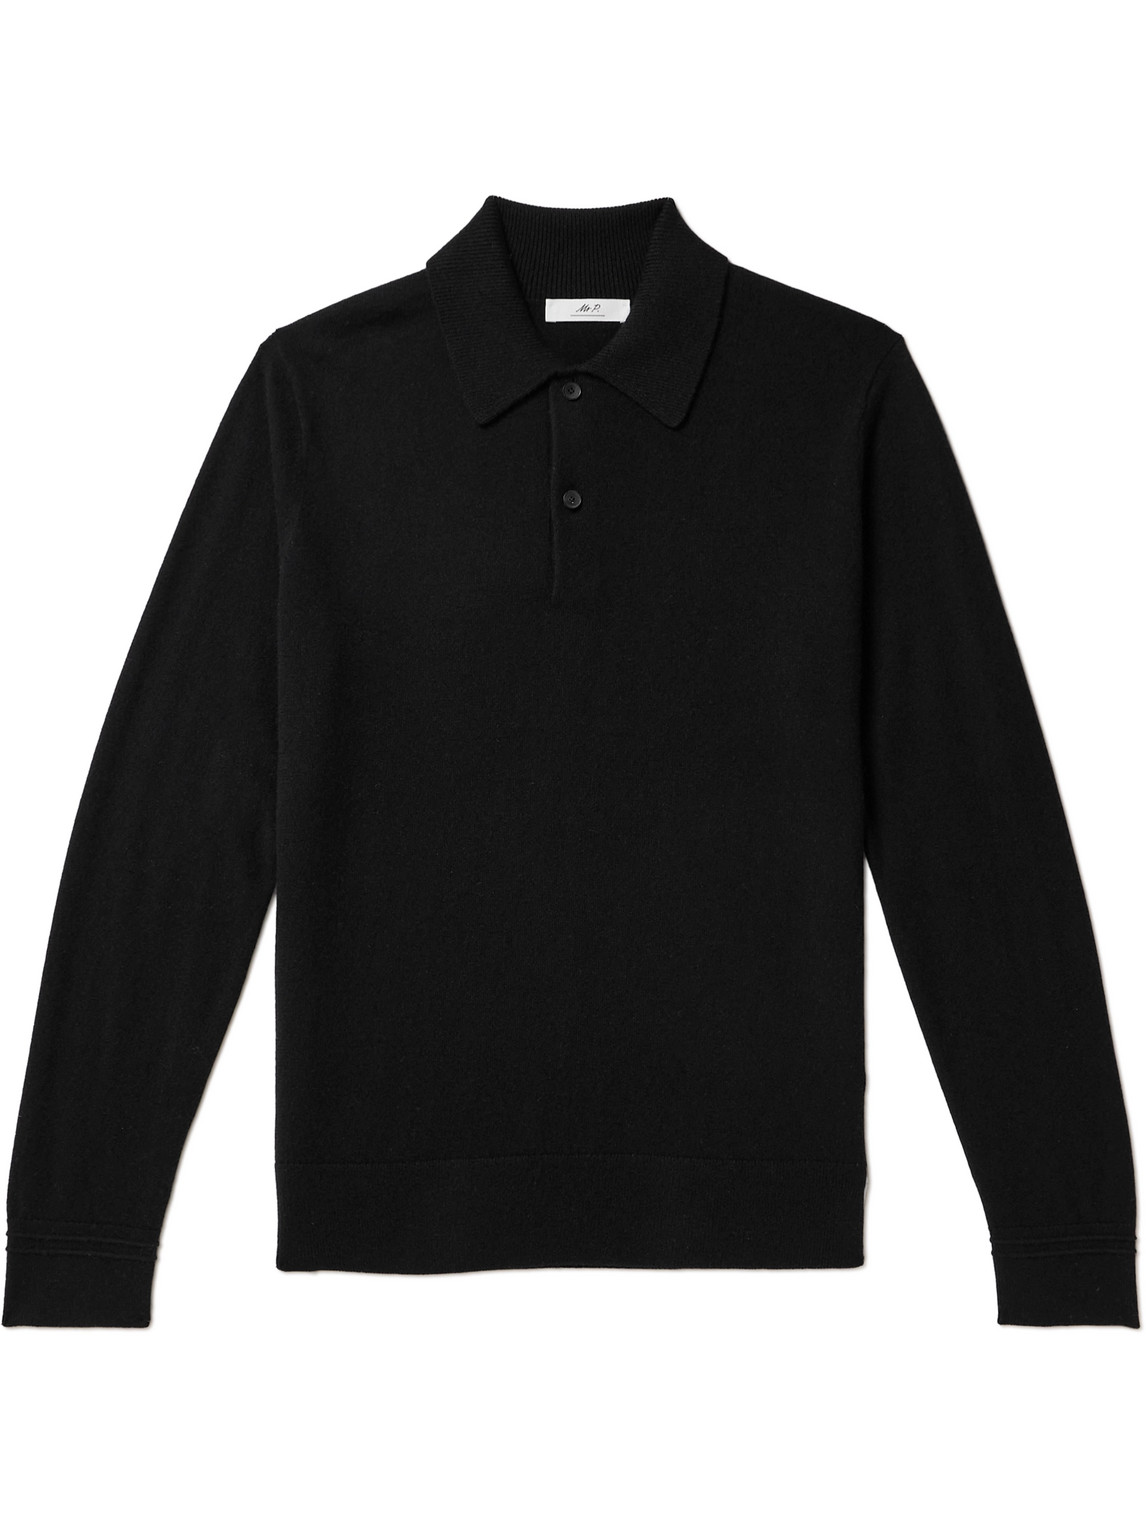 Mr P Cashmere Polo Shirt In Black